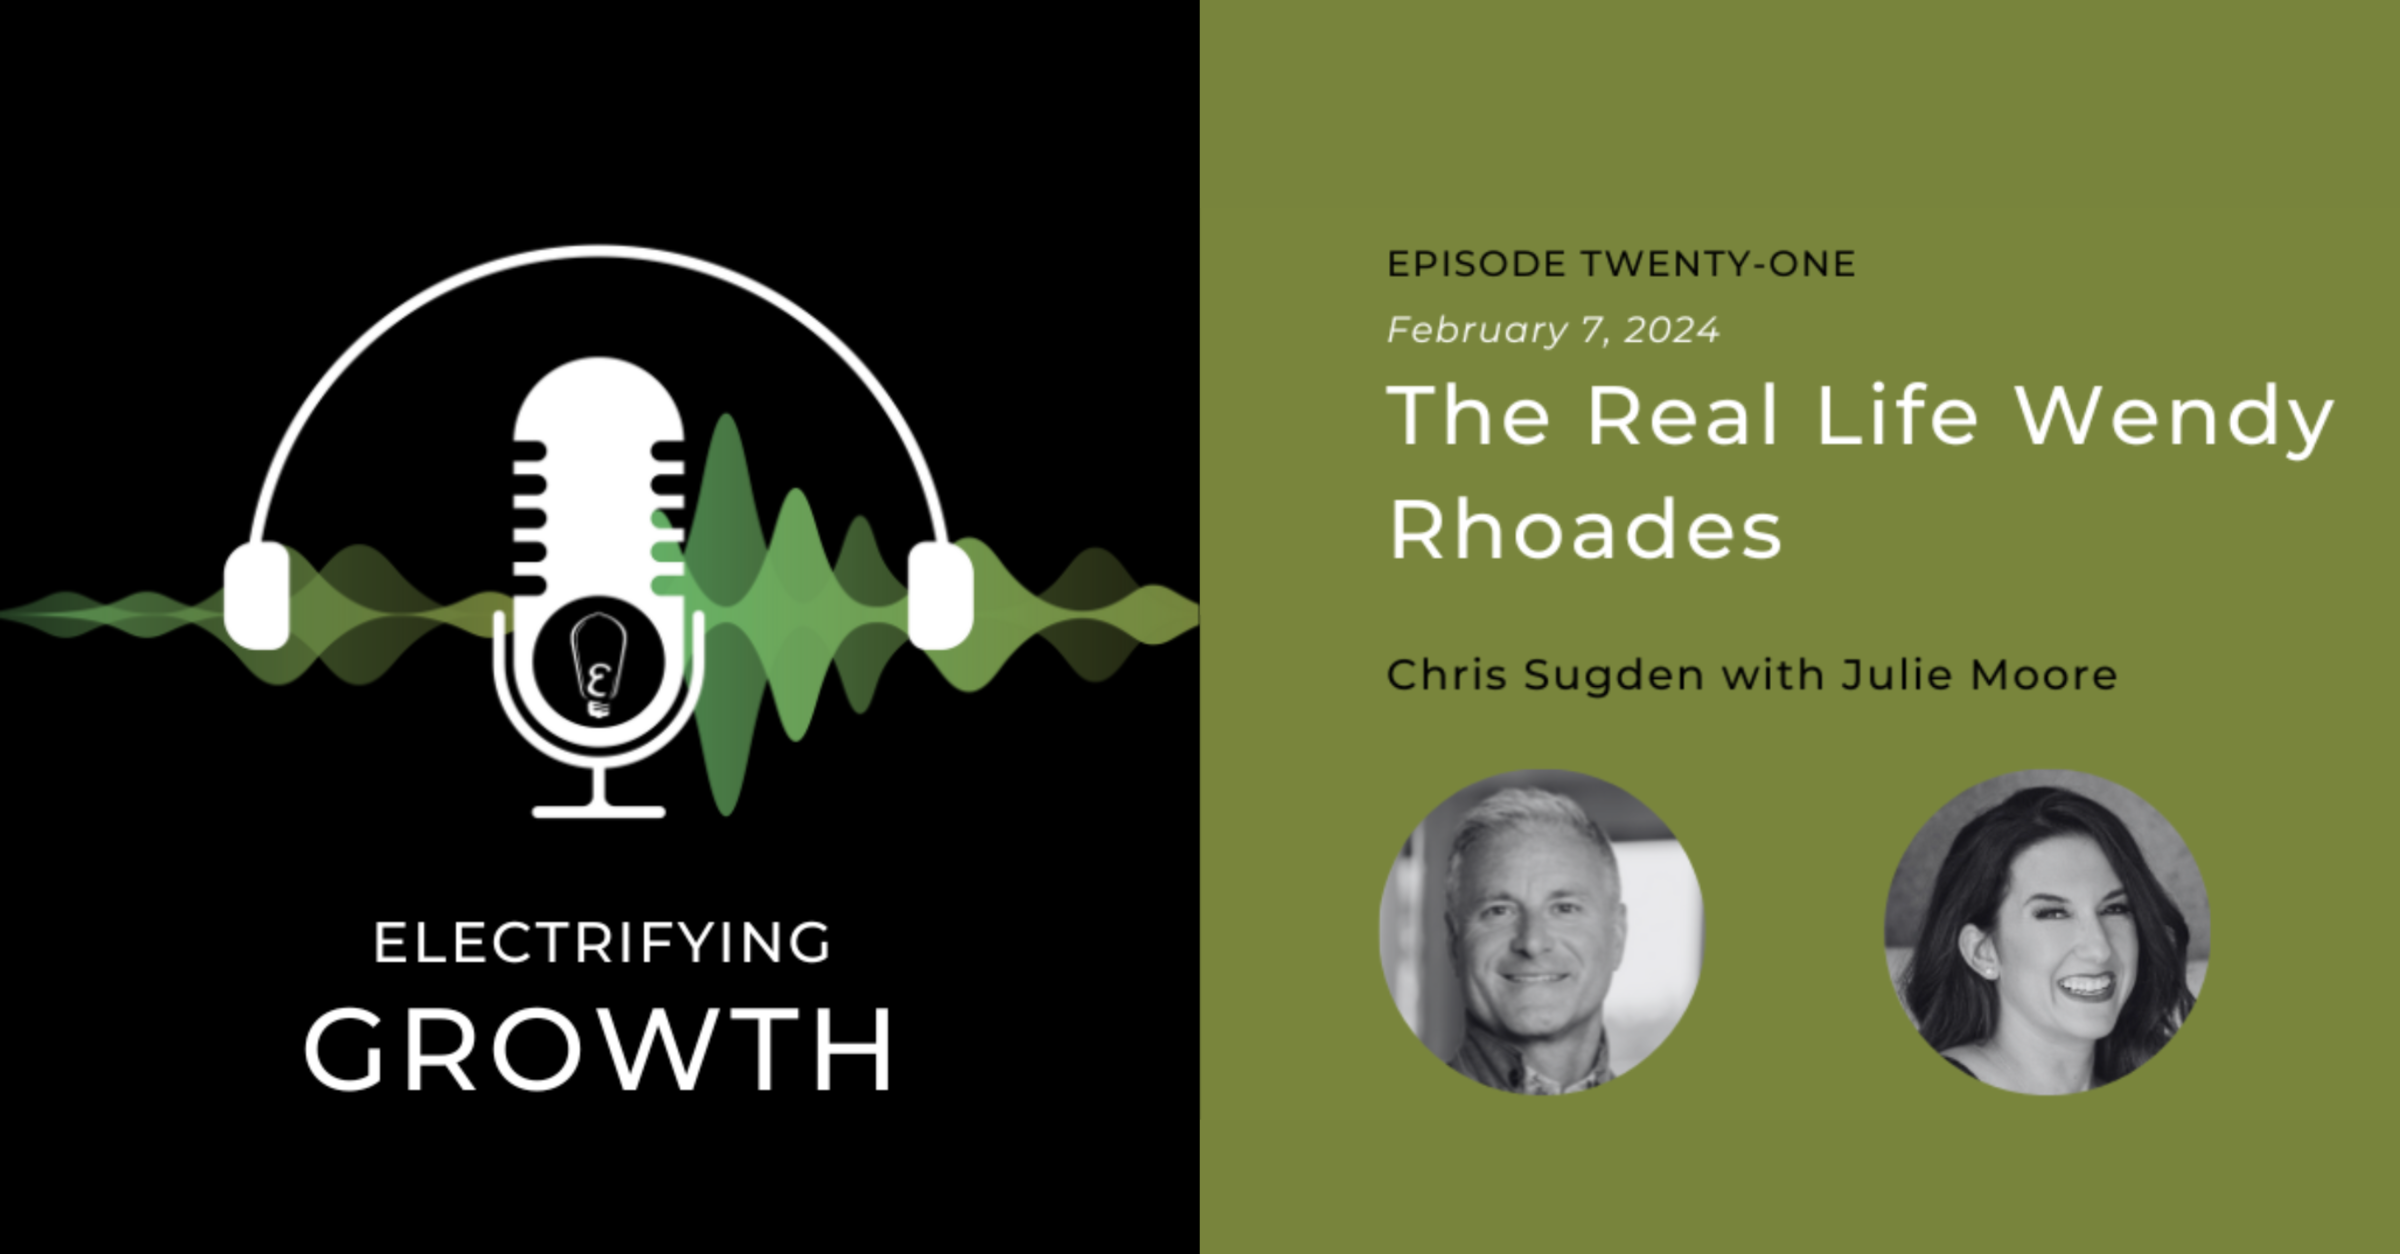 Electrifying Growth Episode 21: The Real Life Wendy Rhoades with Julie Moore